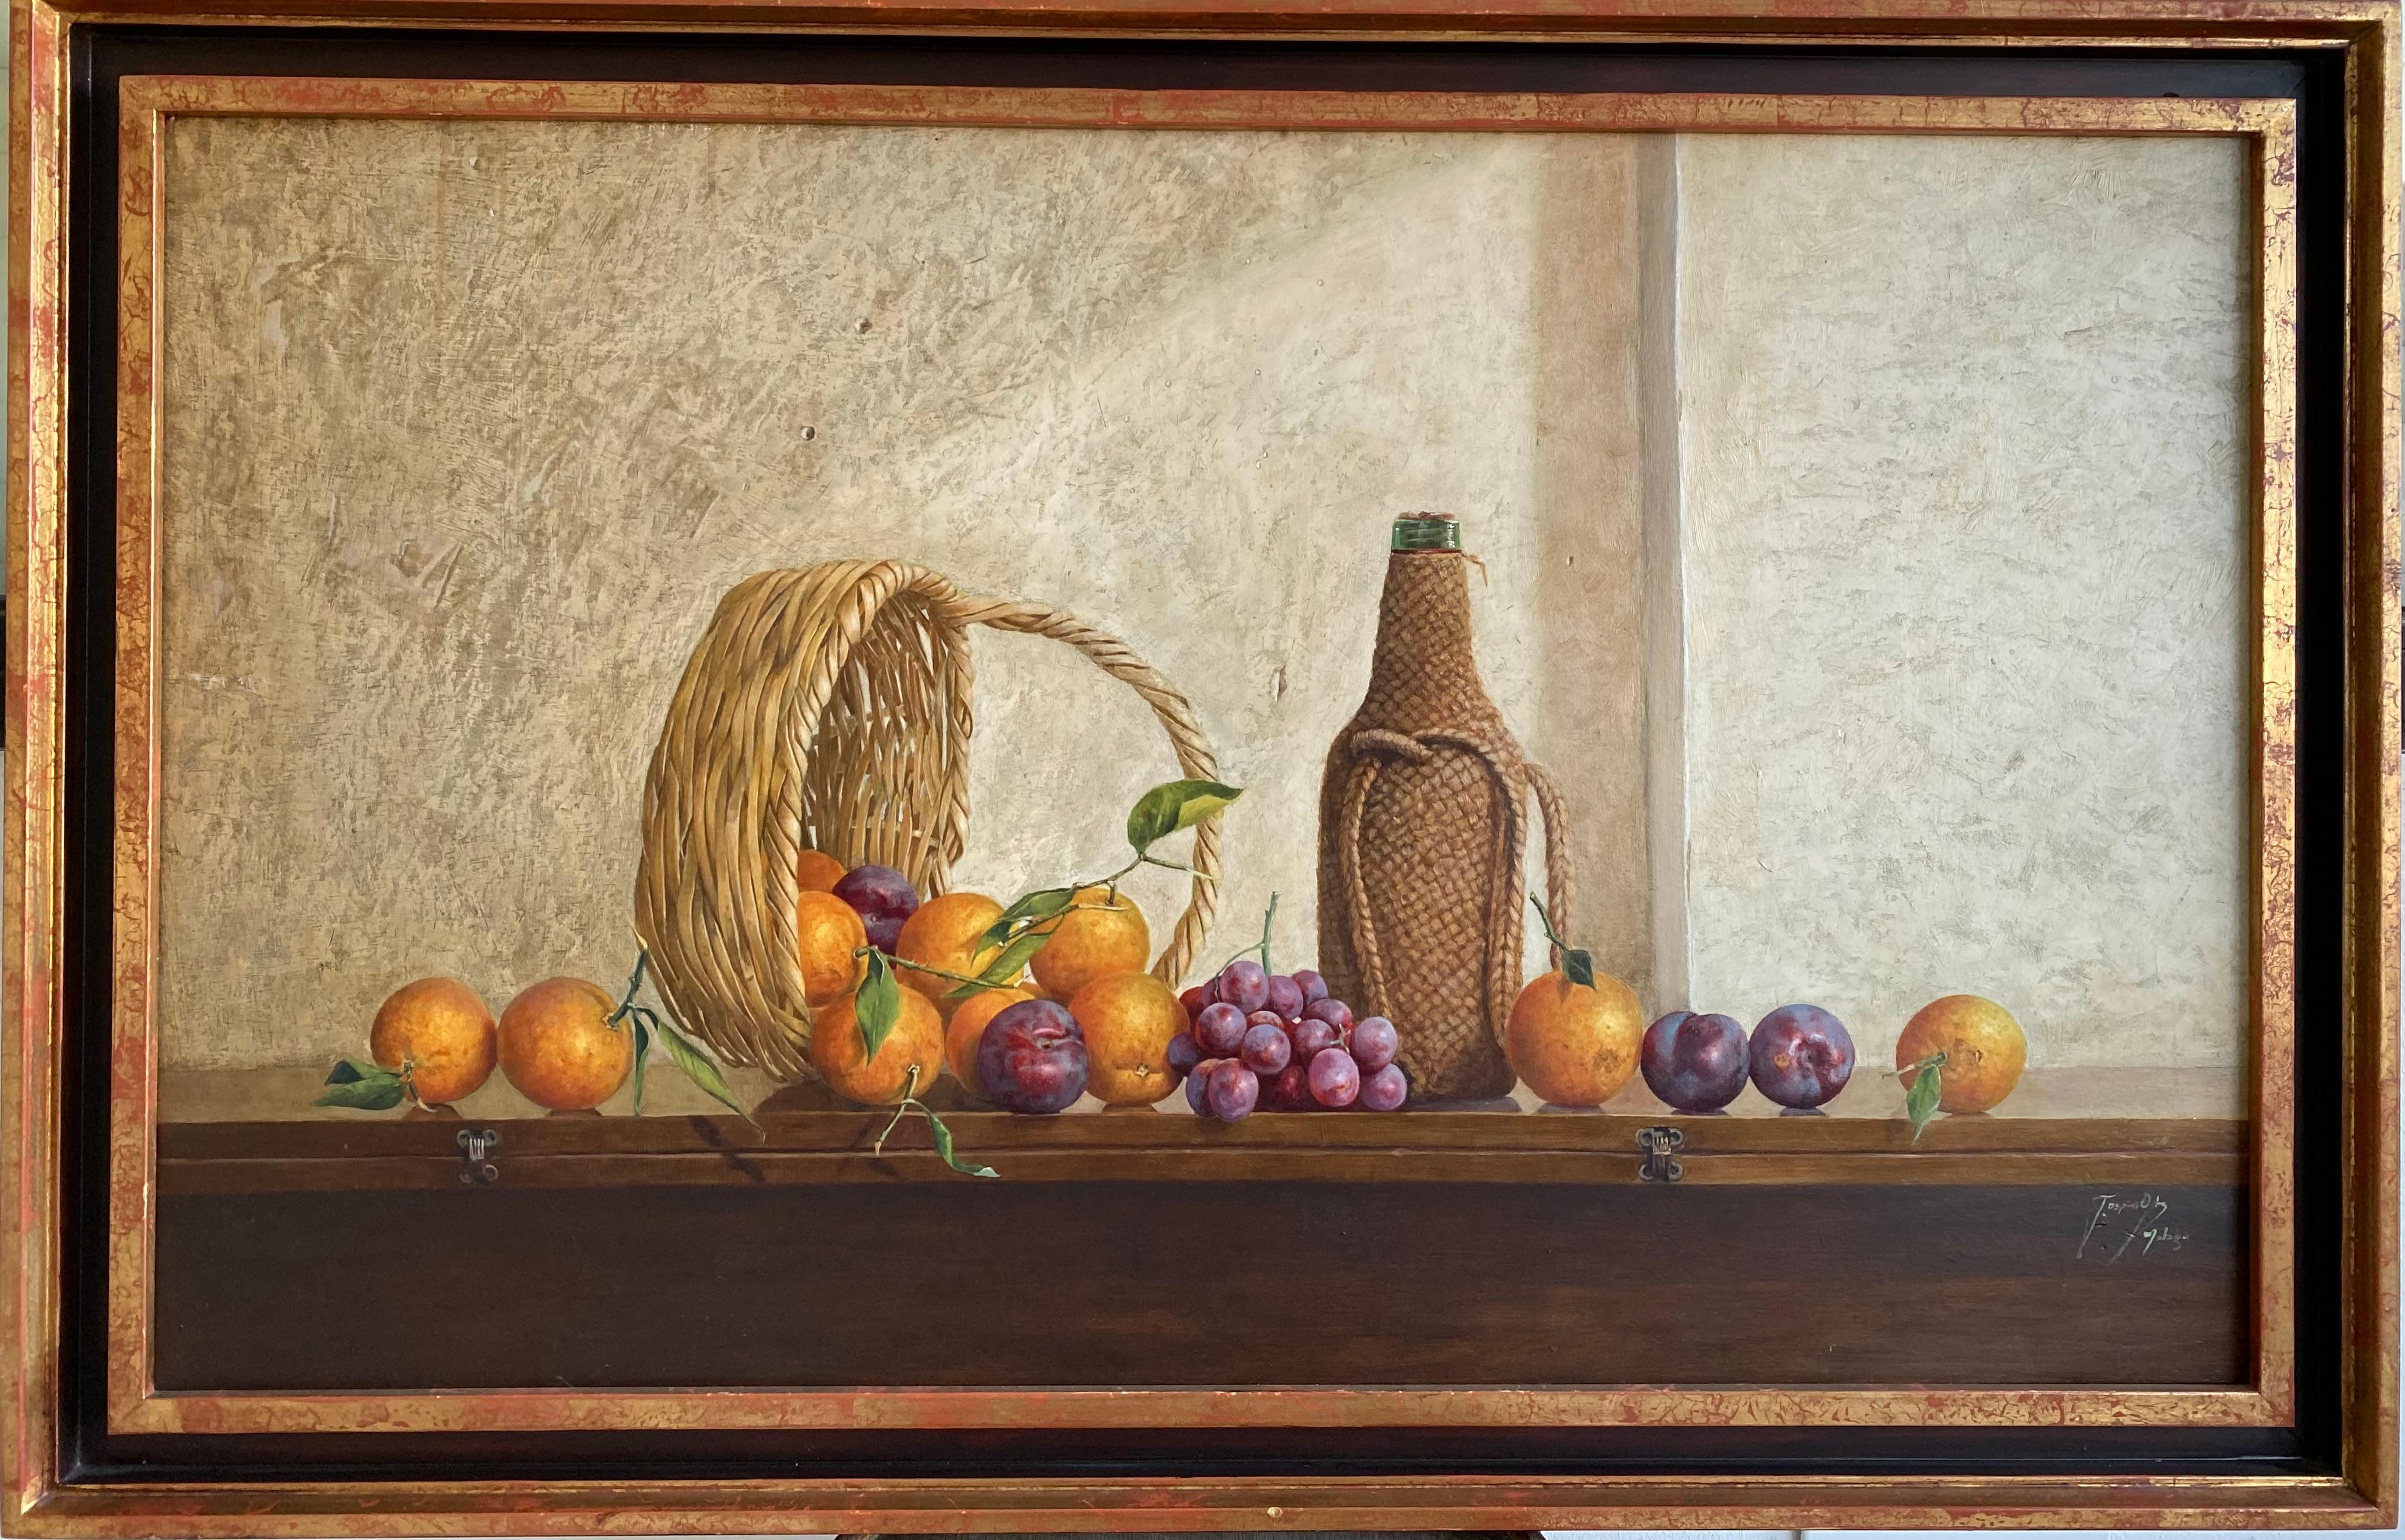 Still life with basket. Spanish Contemporary Figurative Realism. Oil on panel - Painting by Ospina Ortiz